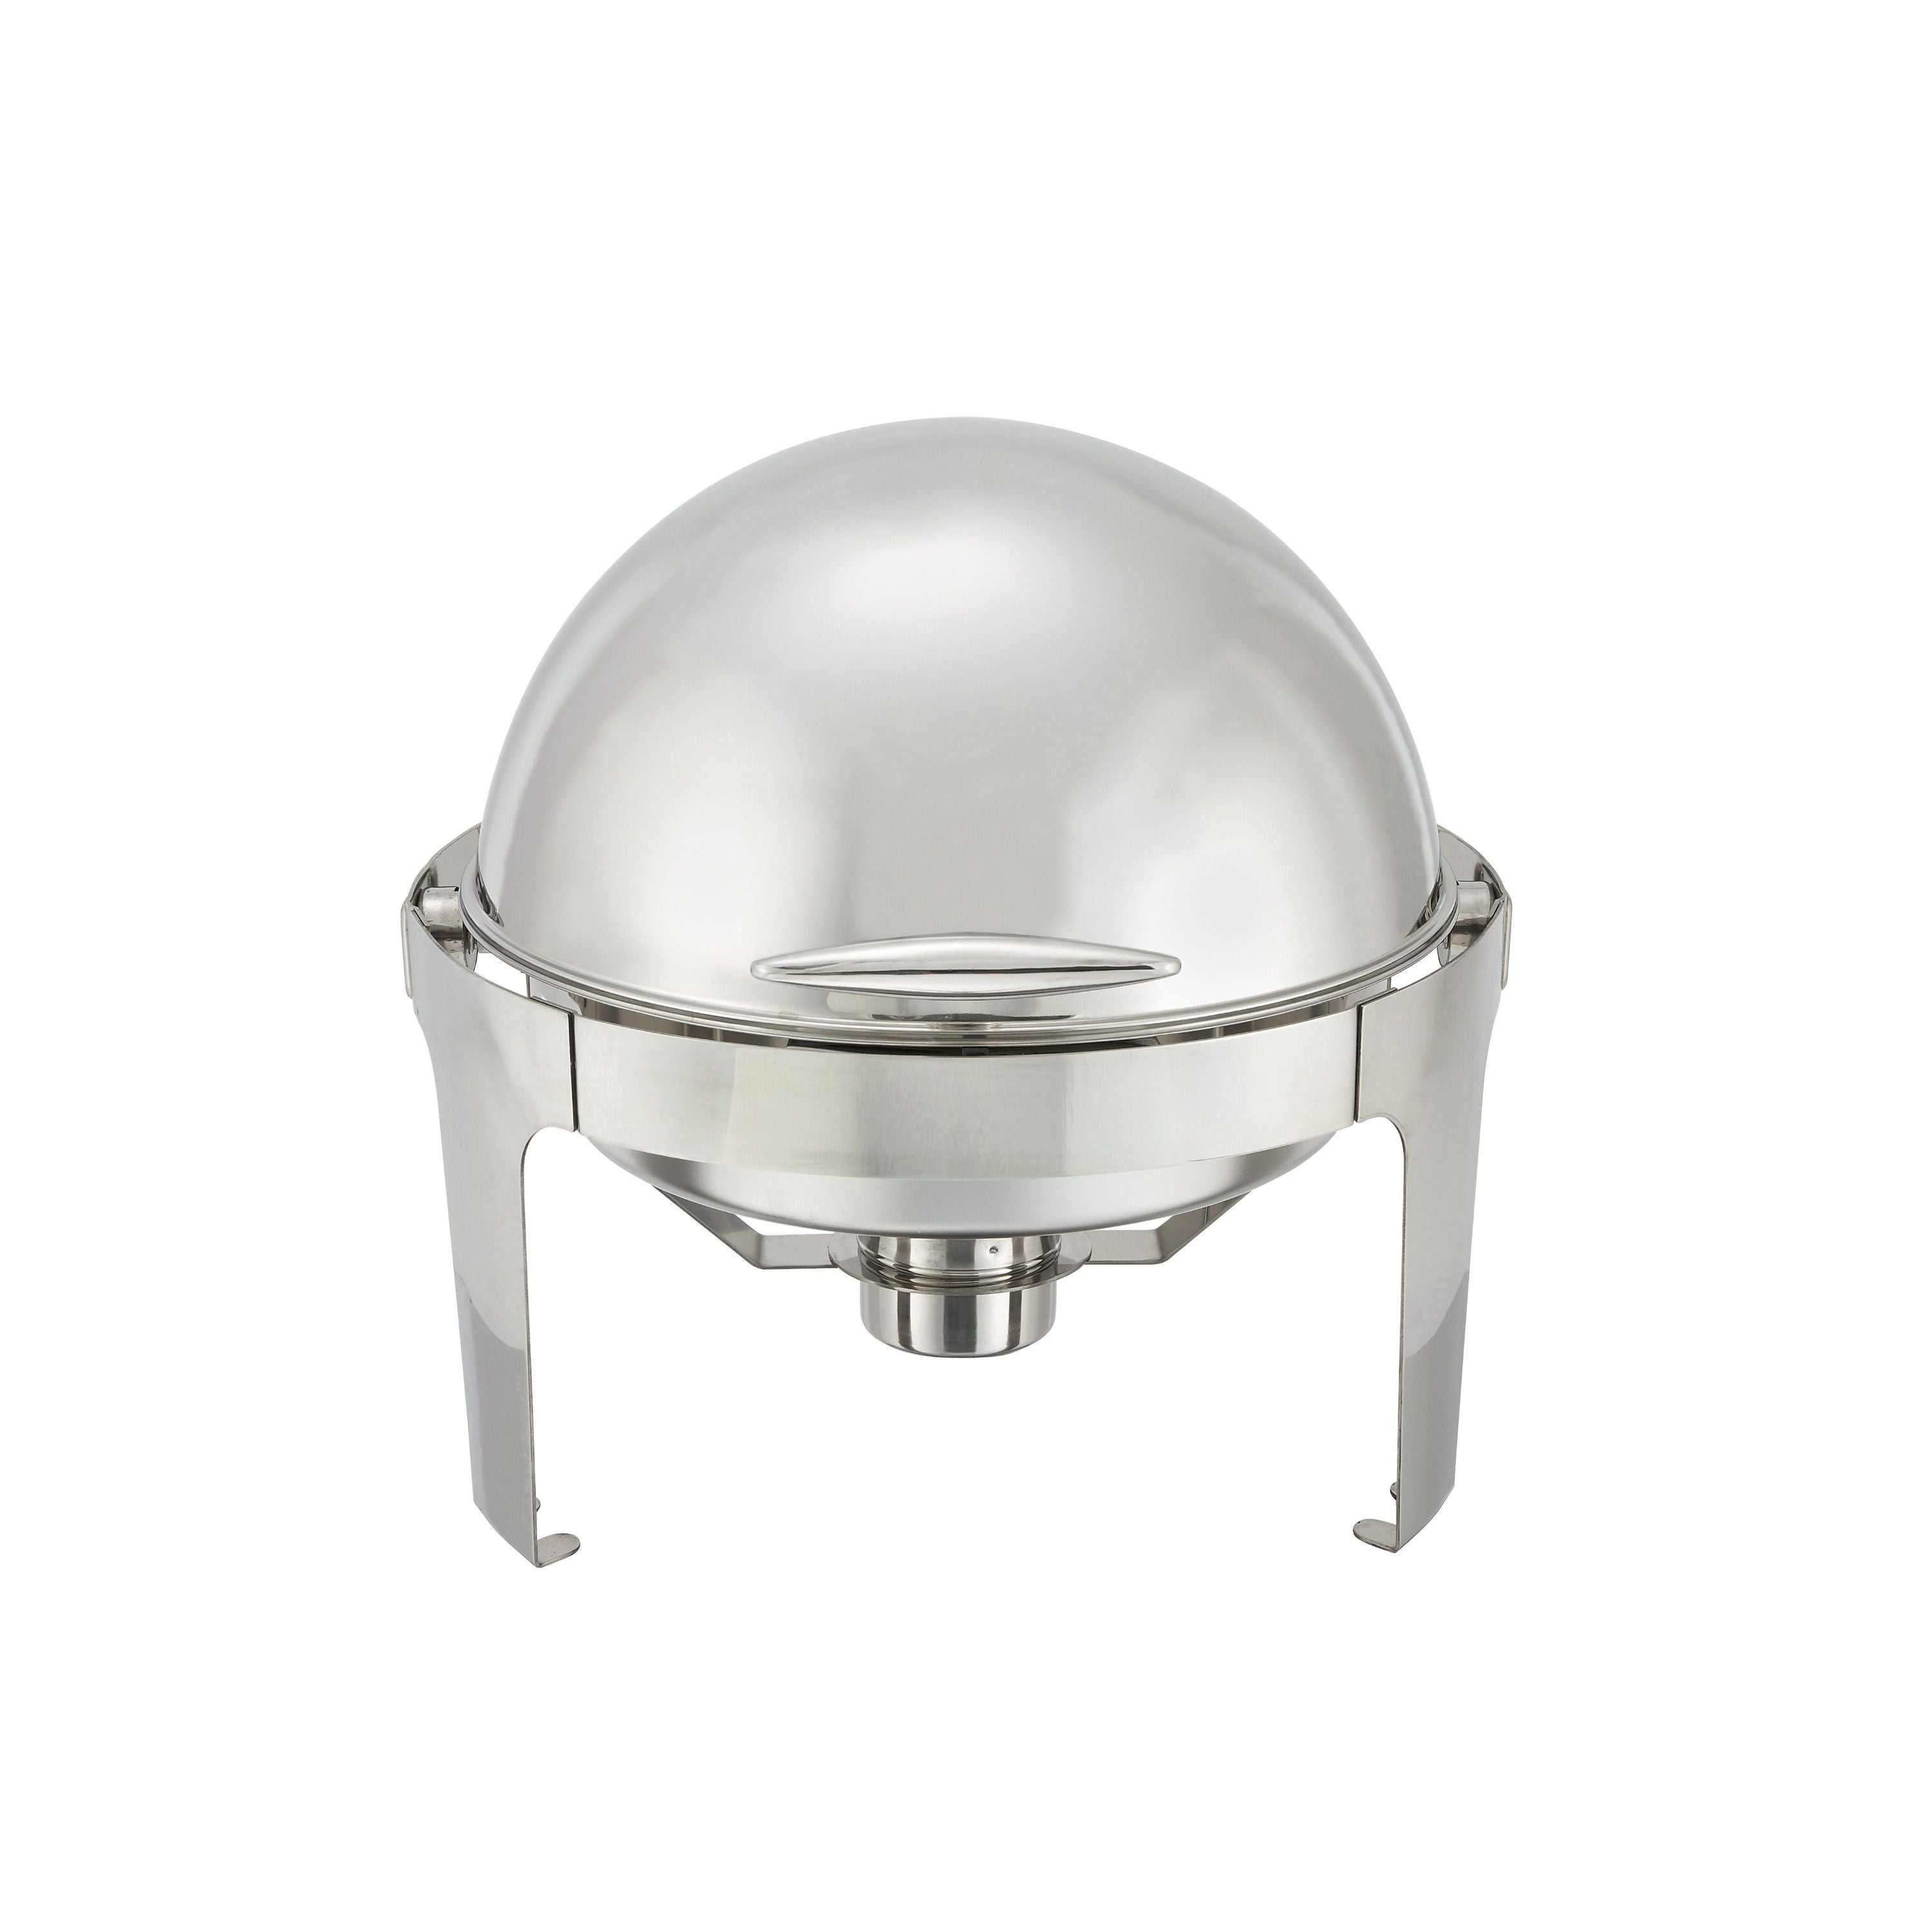 Thunder Group SLRCF0860 6-Quart Round Roll Top Stainless Steel Handle